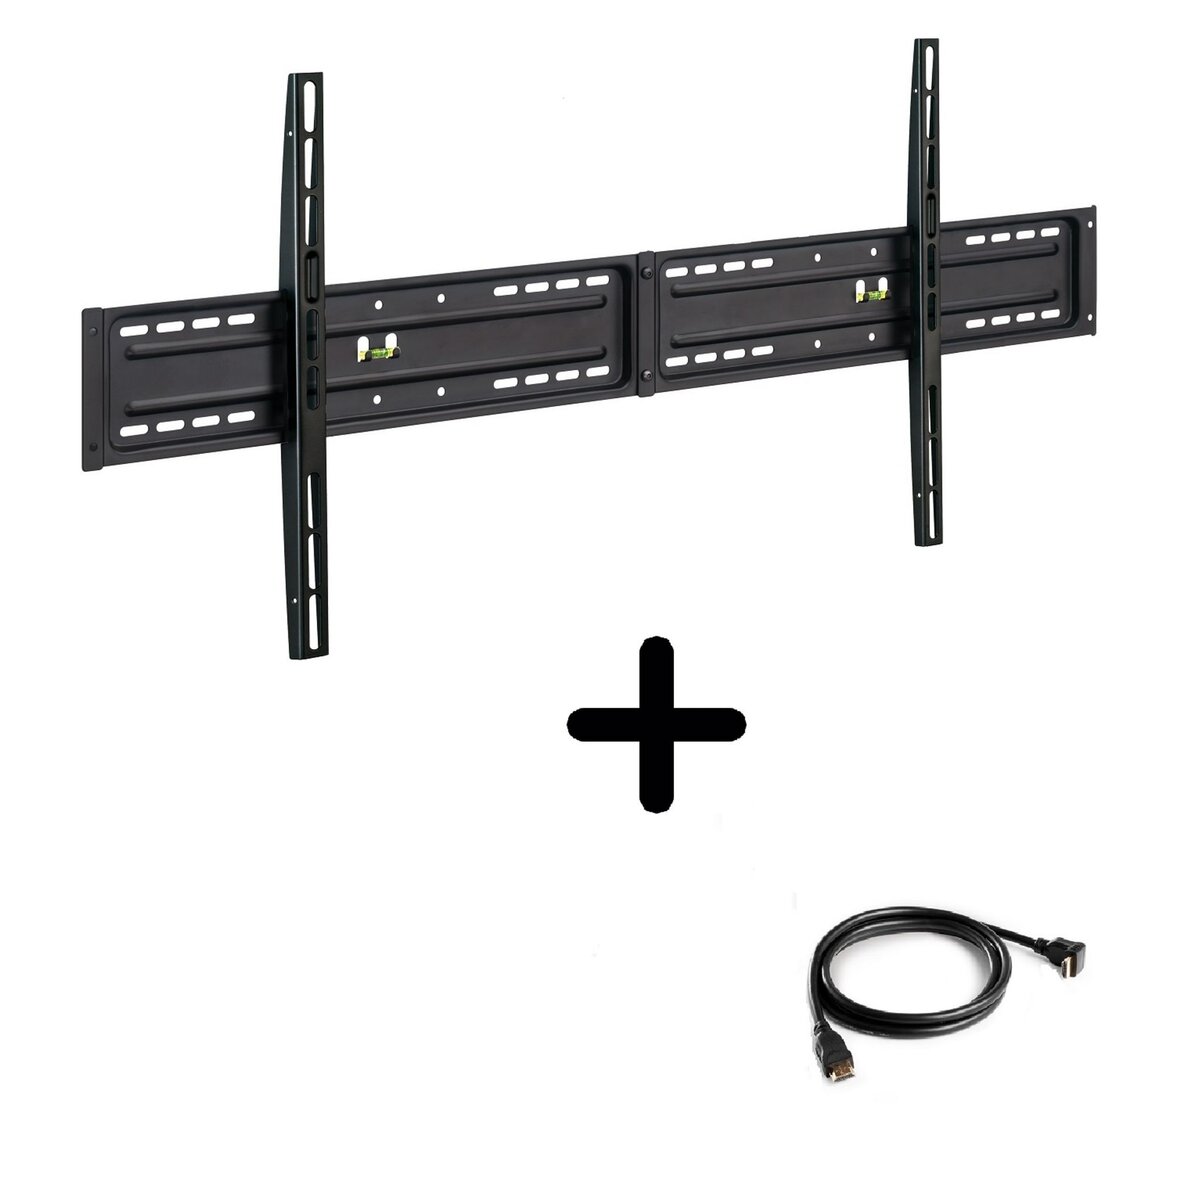 MELICONI Kit 4 support fixe + câble HDMI - Support mural